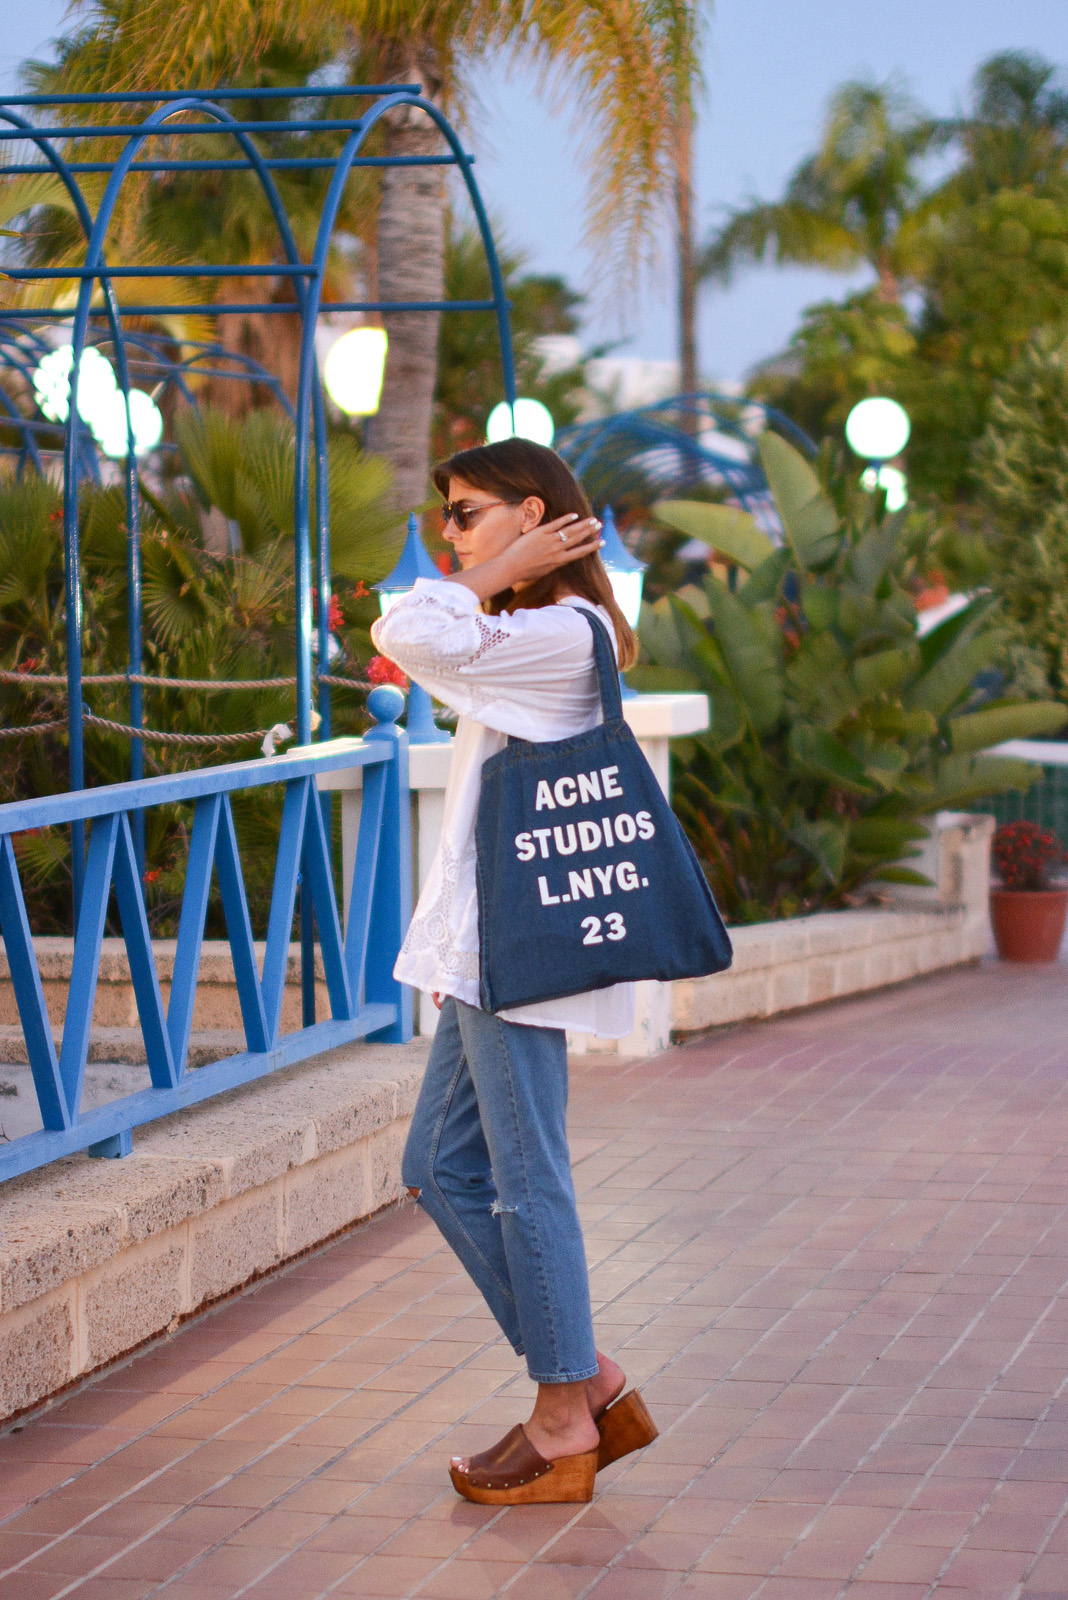 EJSTYLE - Emma Hill wears Acne Studios printed denim tote bag, white summer top with cut out embroidered detail, mASOS thea girlfriend jeans, Dune Keera wedge sandals, Asos aviator sunglasses